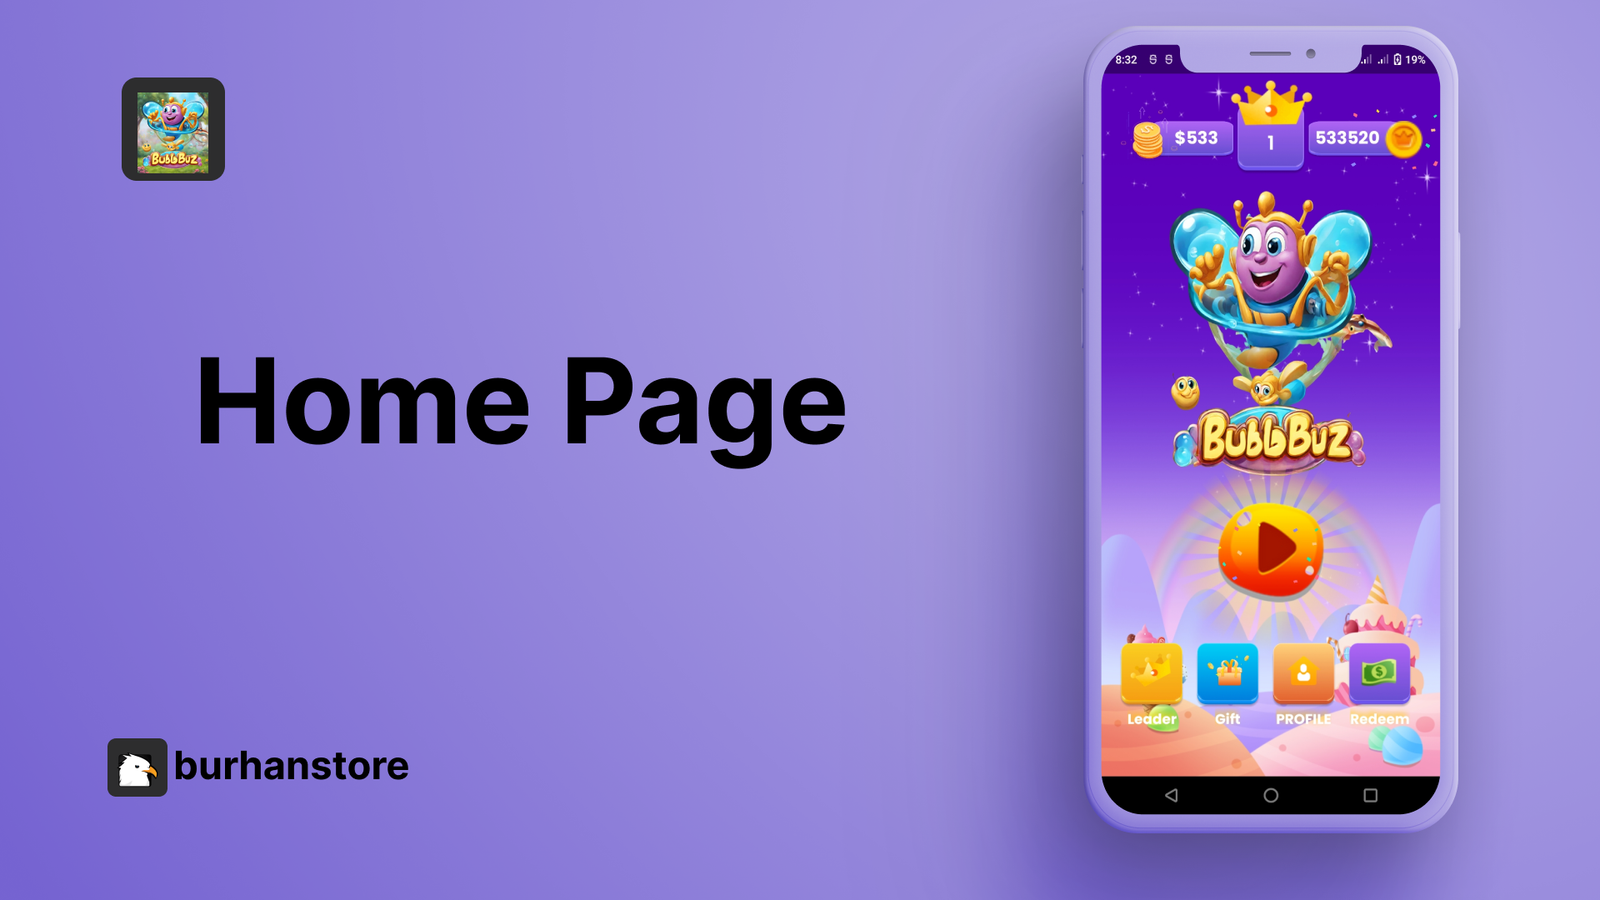 Bubb Buz Bubble Shooter Game - Android Studio Project - 8